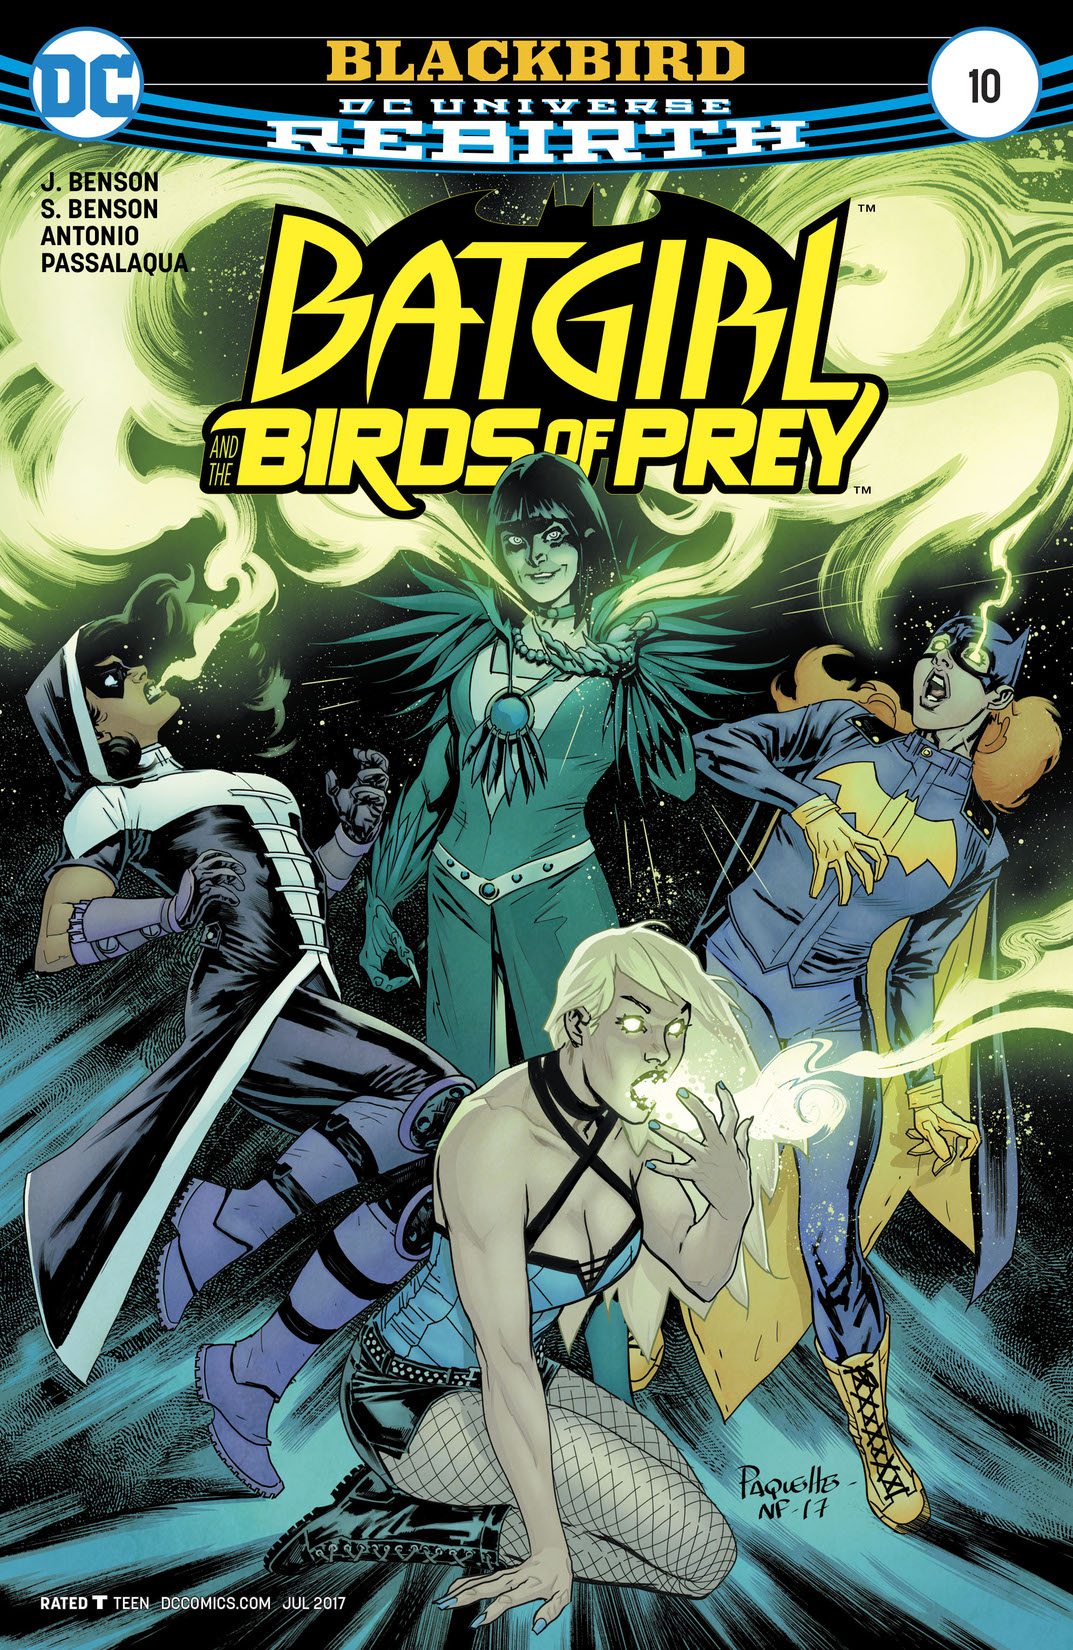 Batgirl and the Birds of Prey #10 preview images